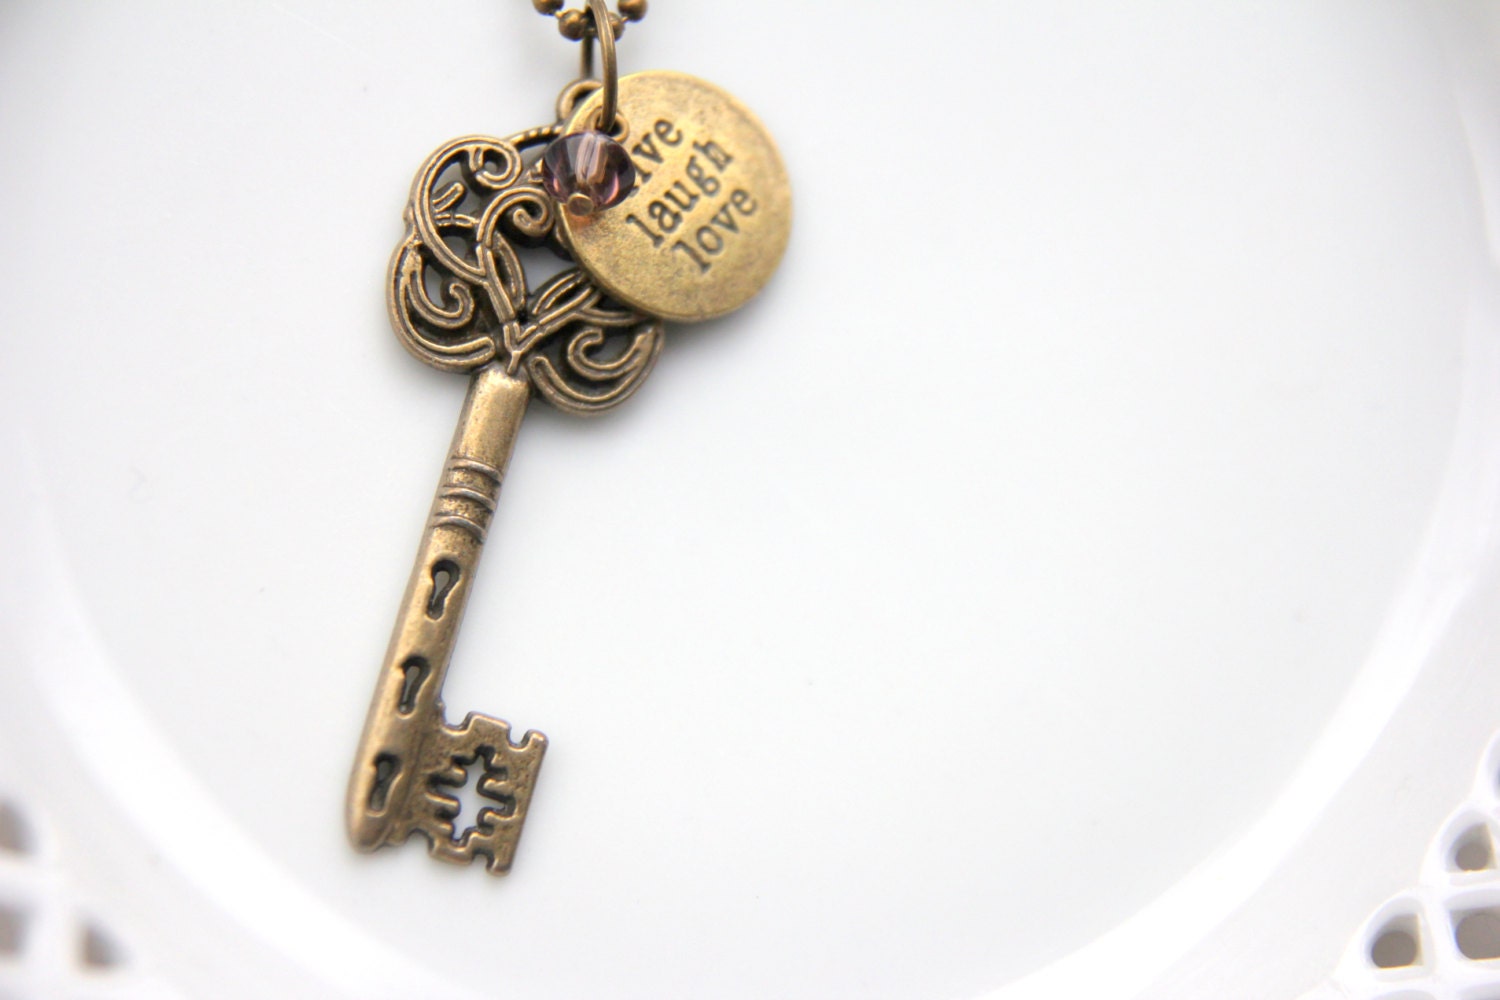 Beautiful Victorian Skeleton Key Antique Brass Necklace by Wrhs11